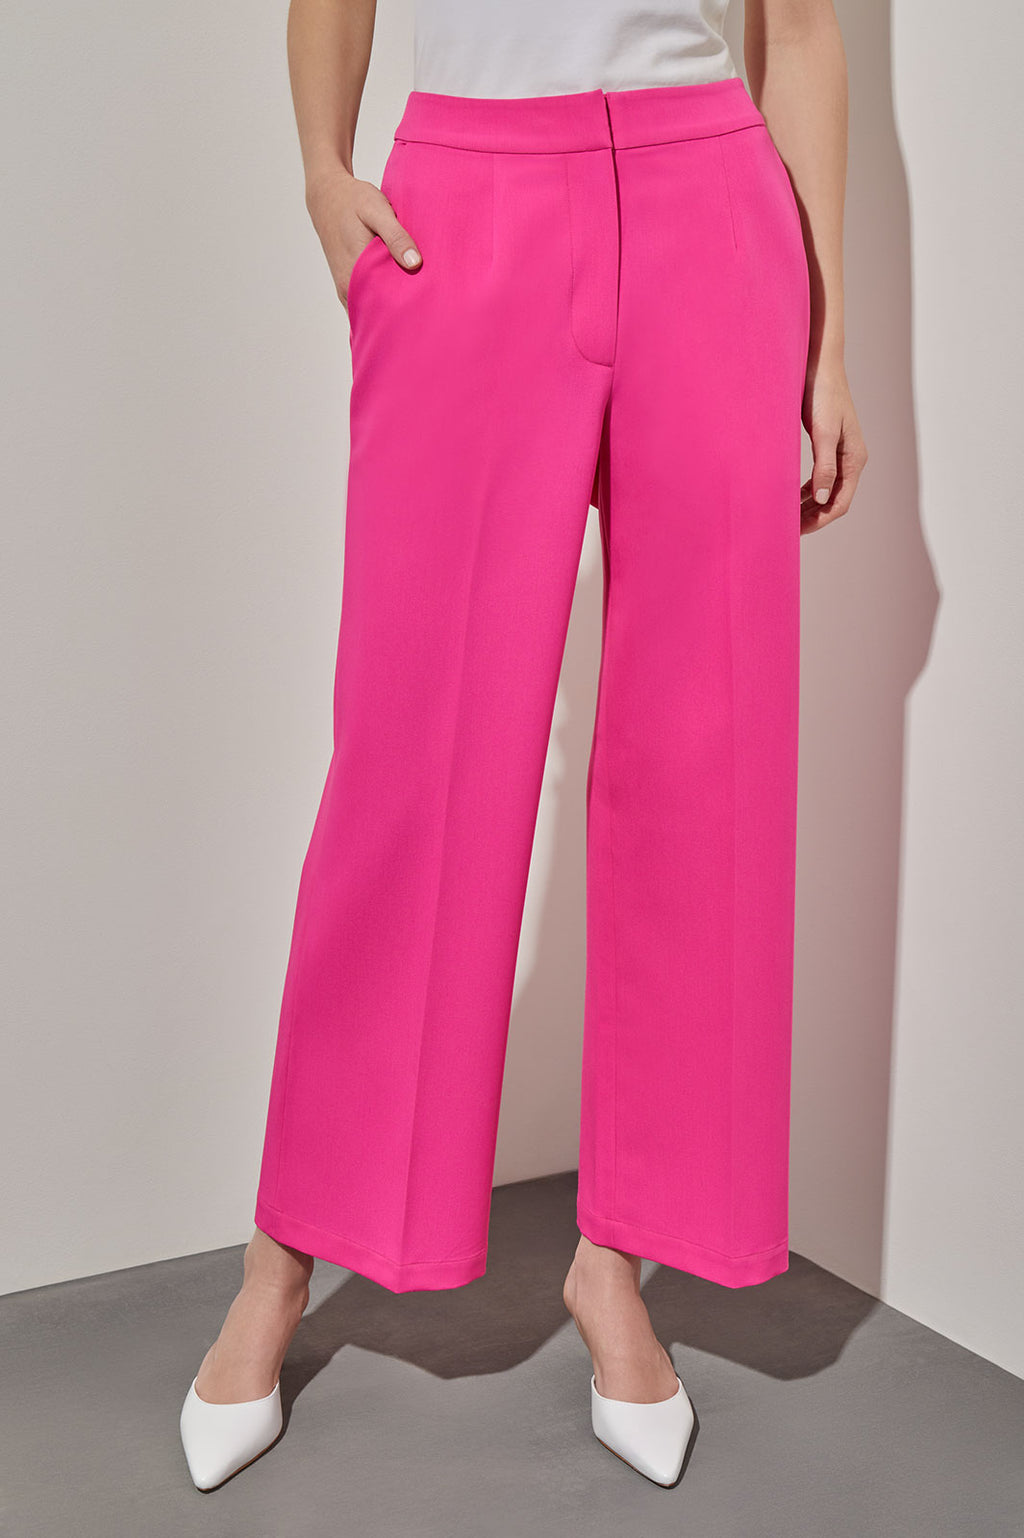 Wide-Leg Pant - Pull-On Stretch Deco Crepe